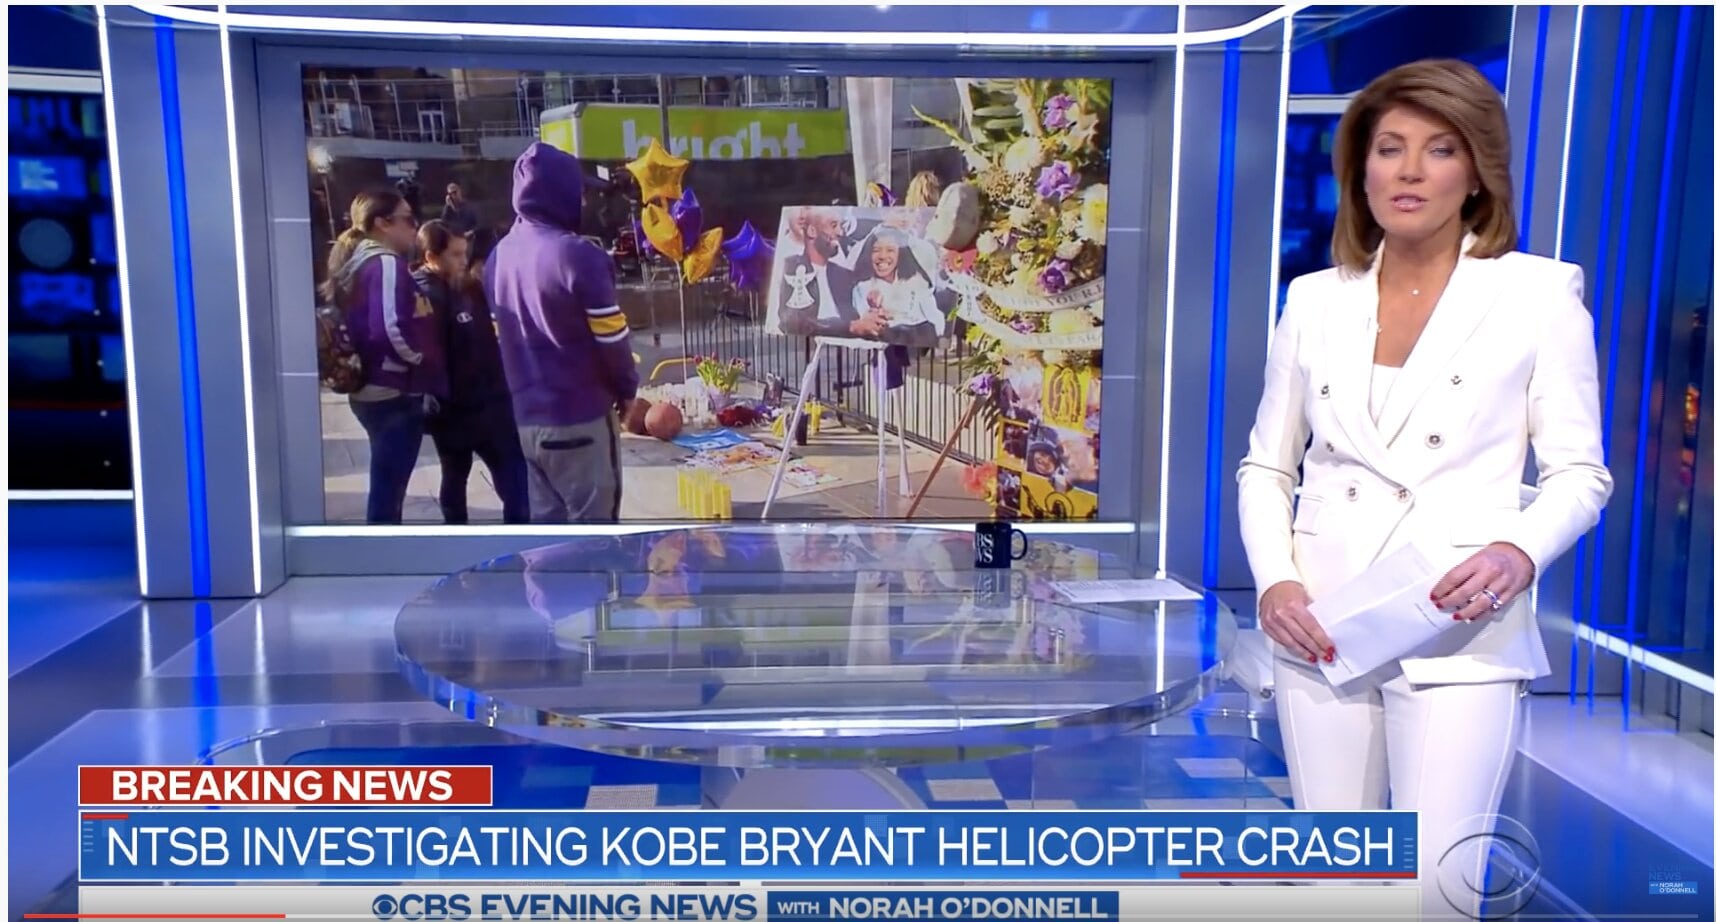 No distress call before helicopter crash that “killed” Kobe Bryant, yet the media knew of a “fire” in the copter | #KobeDeathHoax